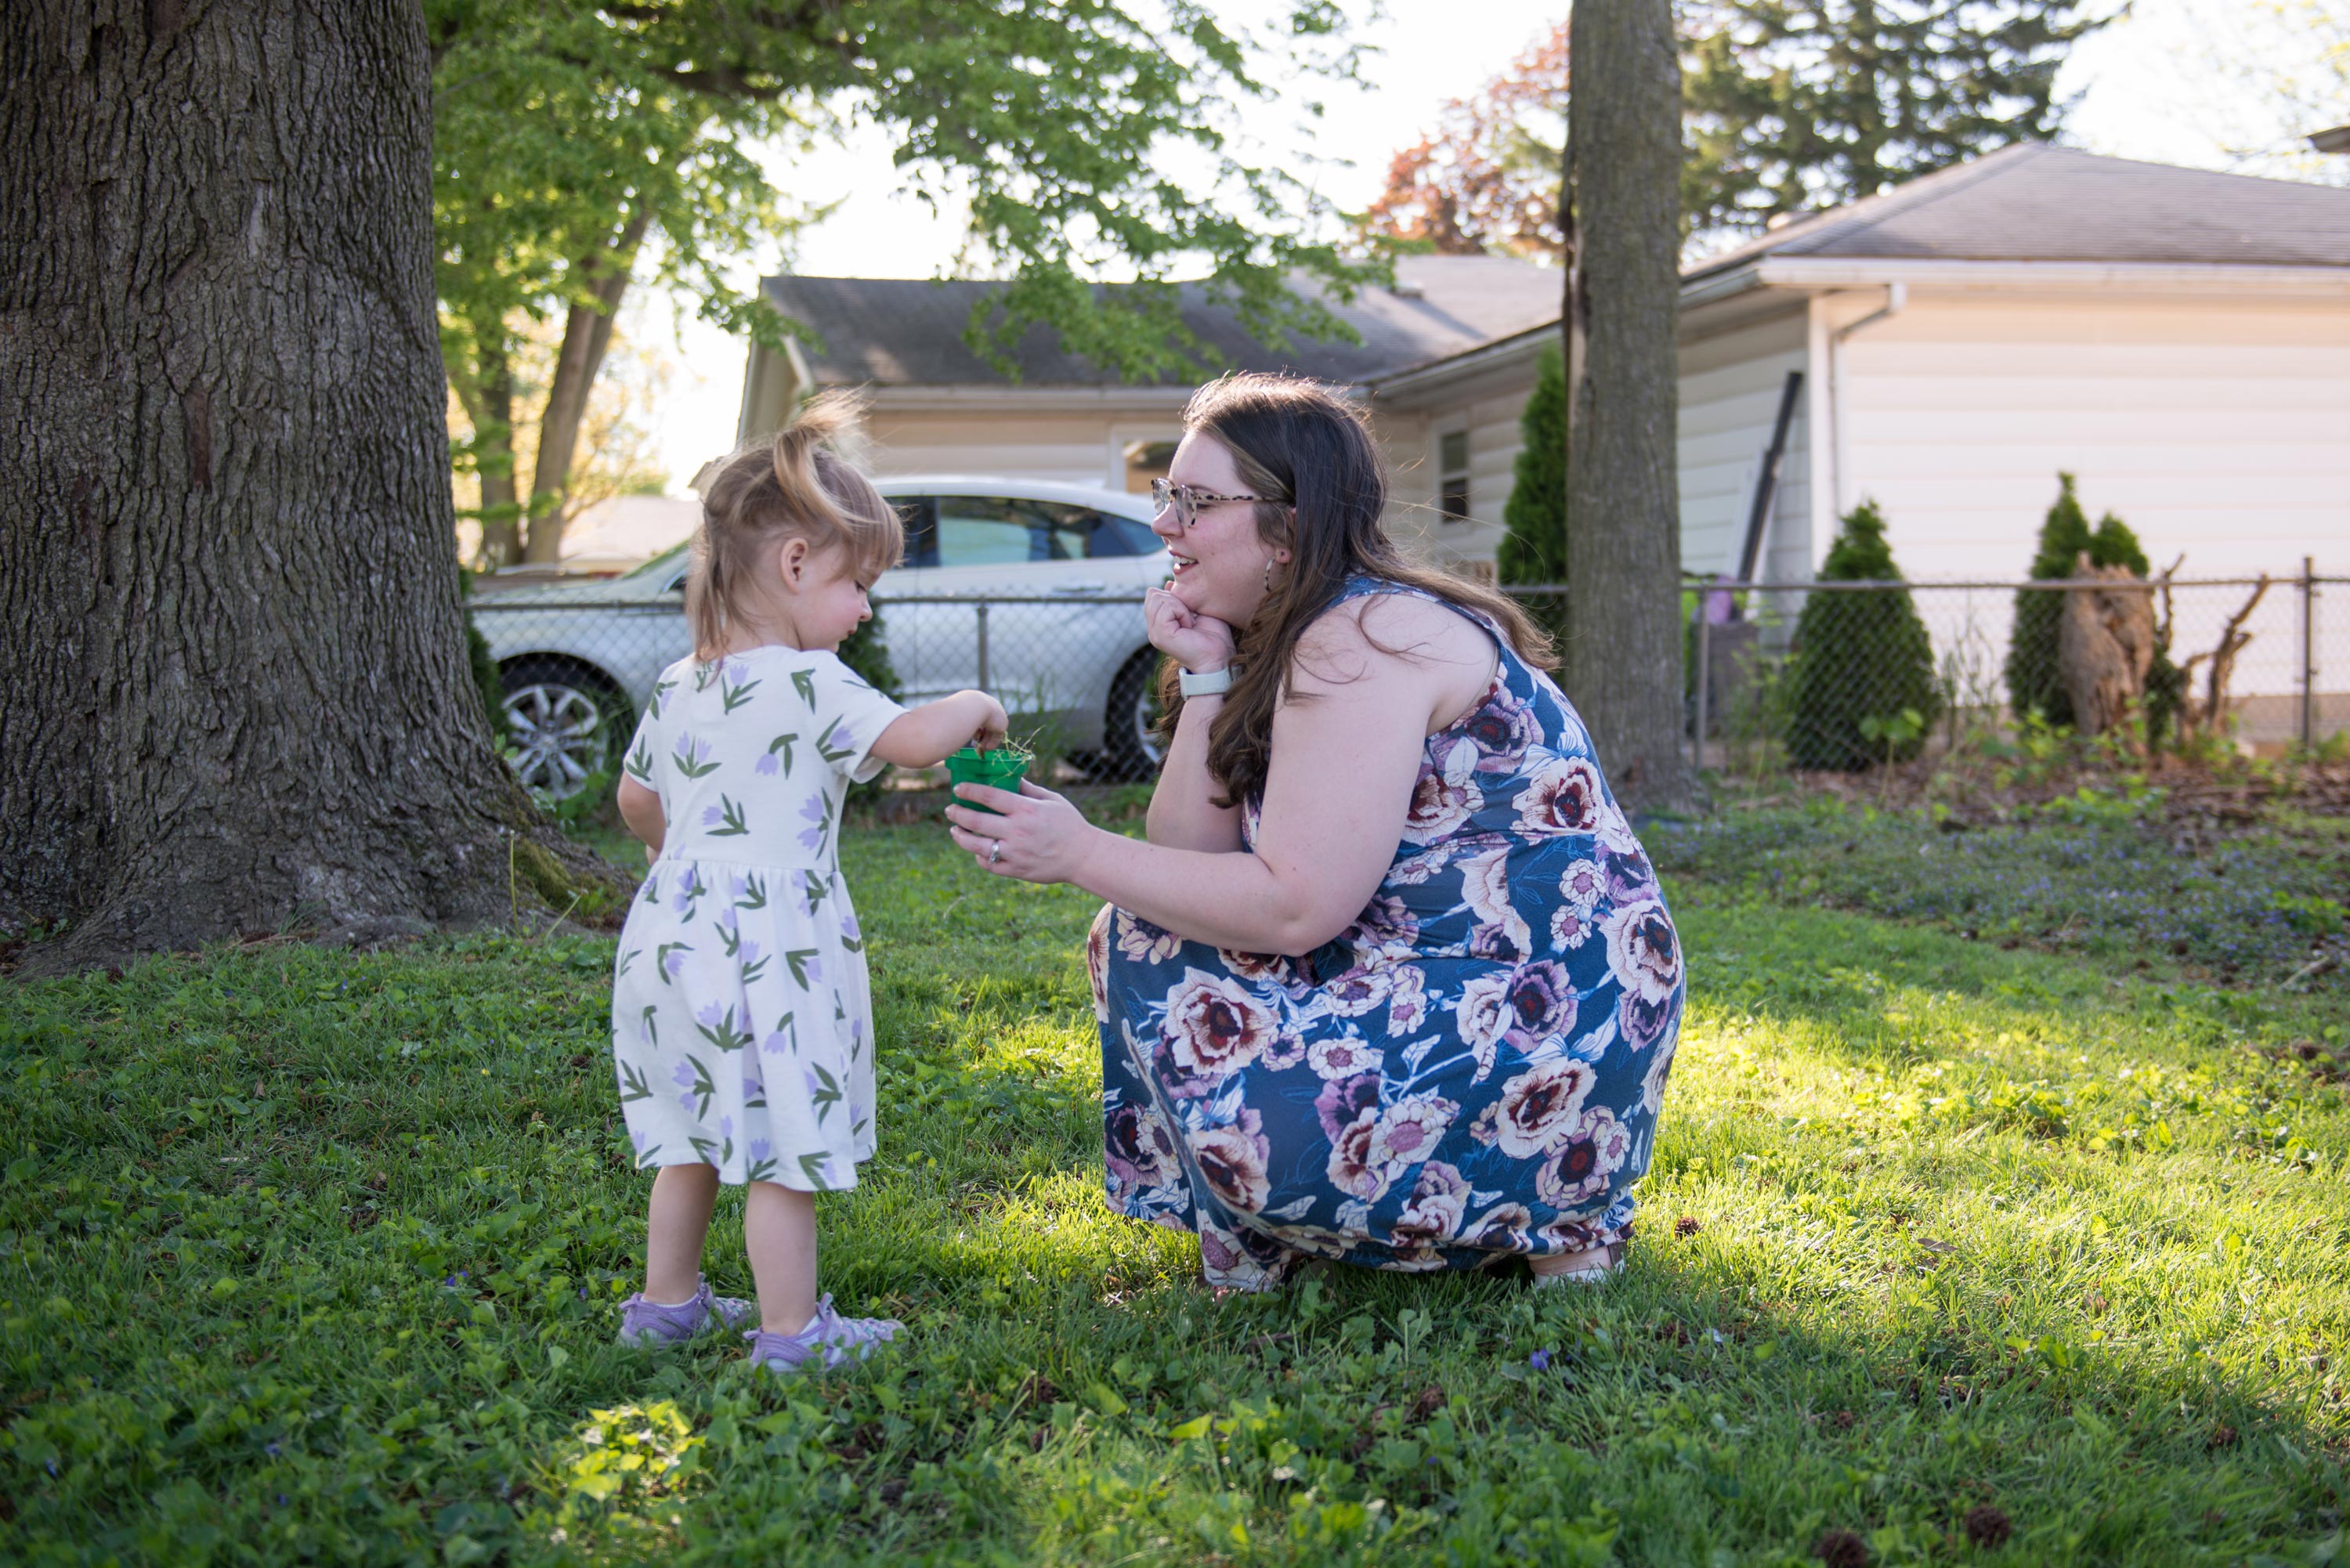 A photo of a mother showing a small planter to her daughter outside.